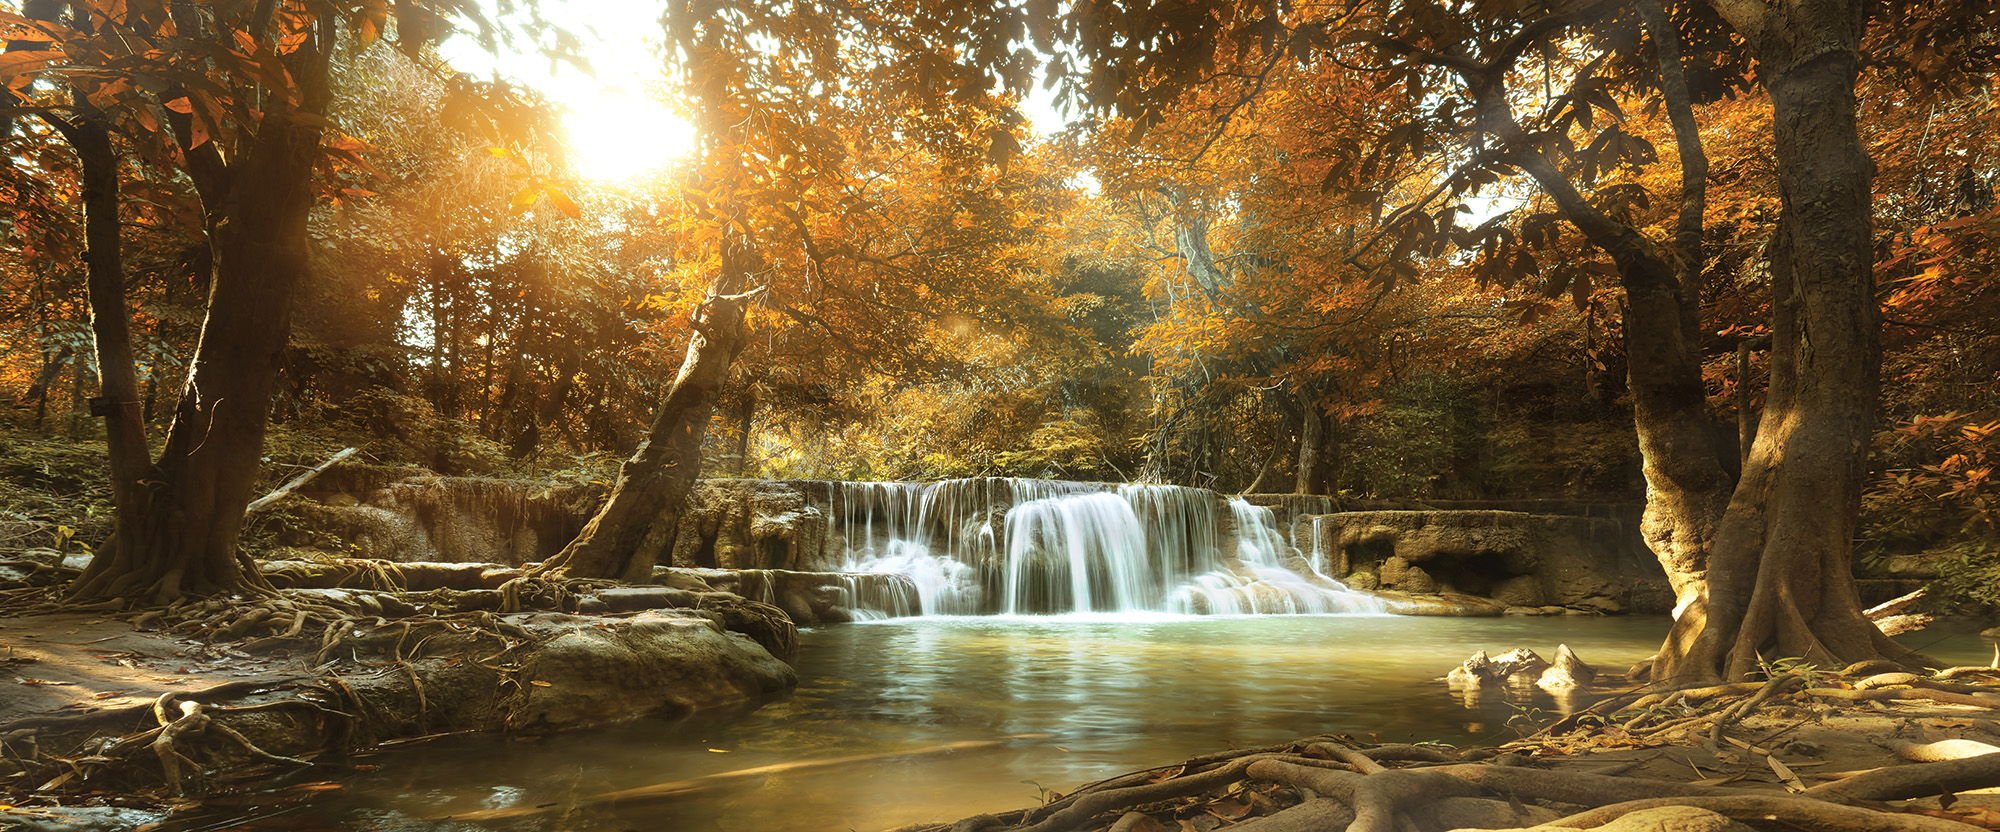 Painting on canvas: Forest waterfalls (1) - 145x45 cm